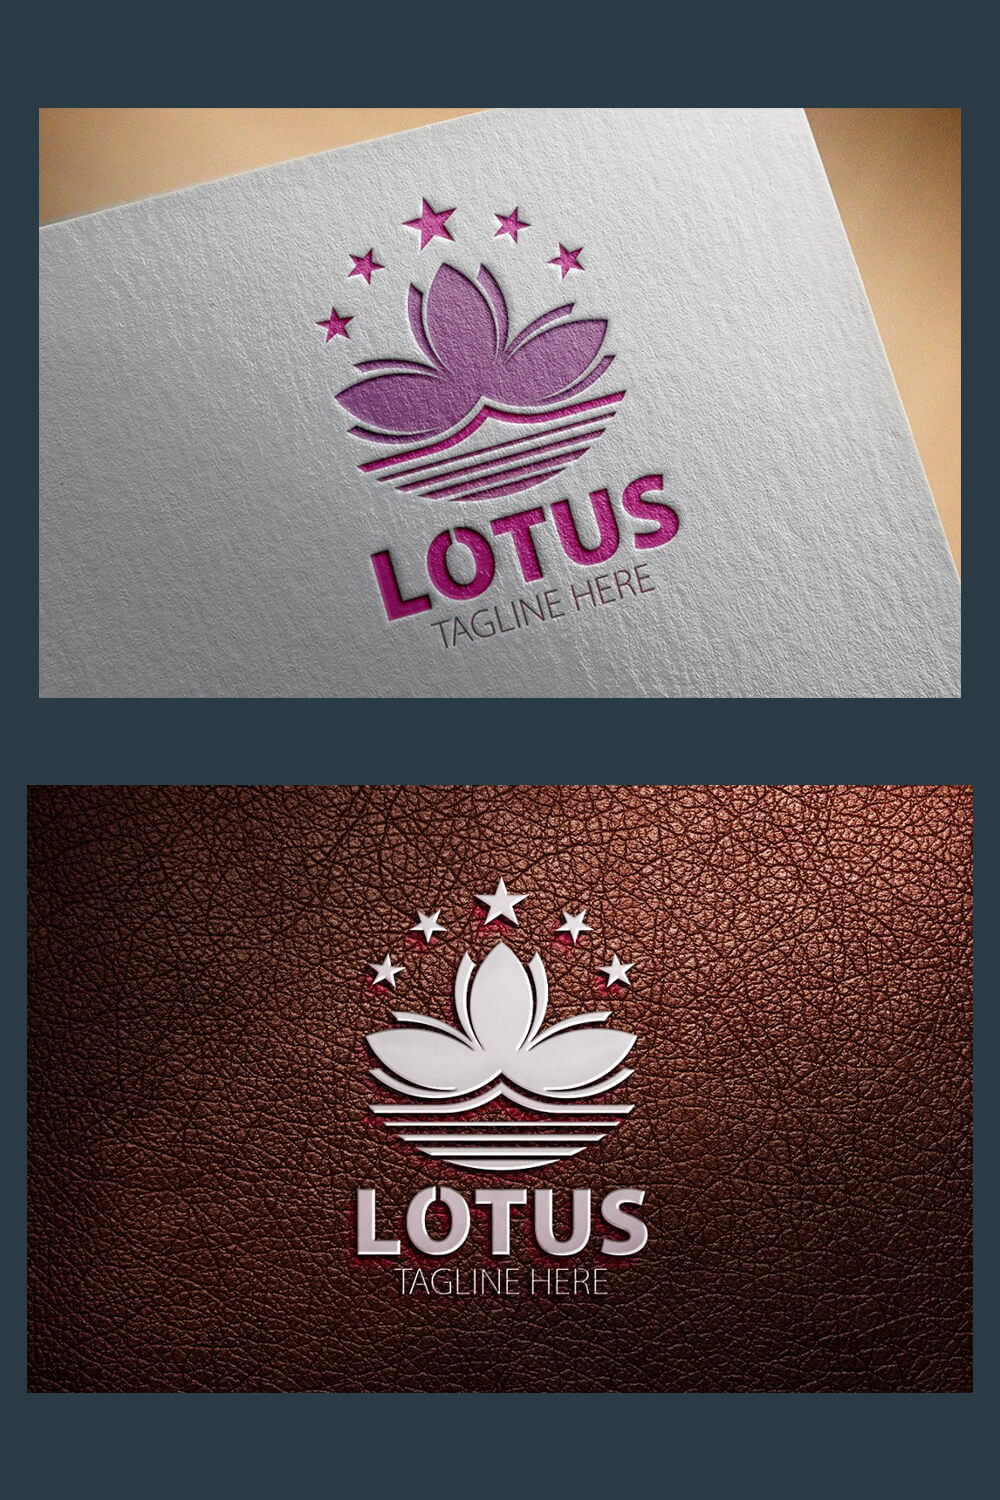 Two different logos in the form of a lotus flower, the first is pink on a gray background, the second is white on a brown background.